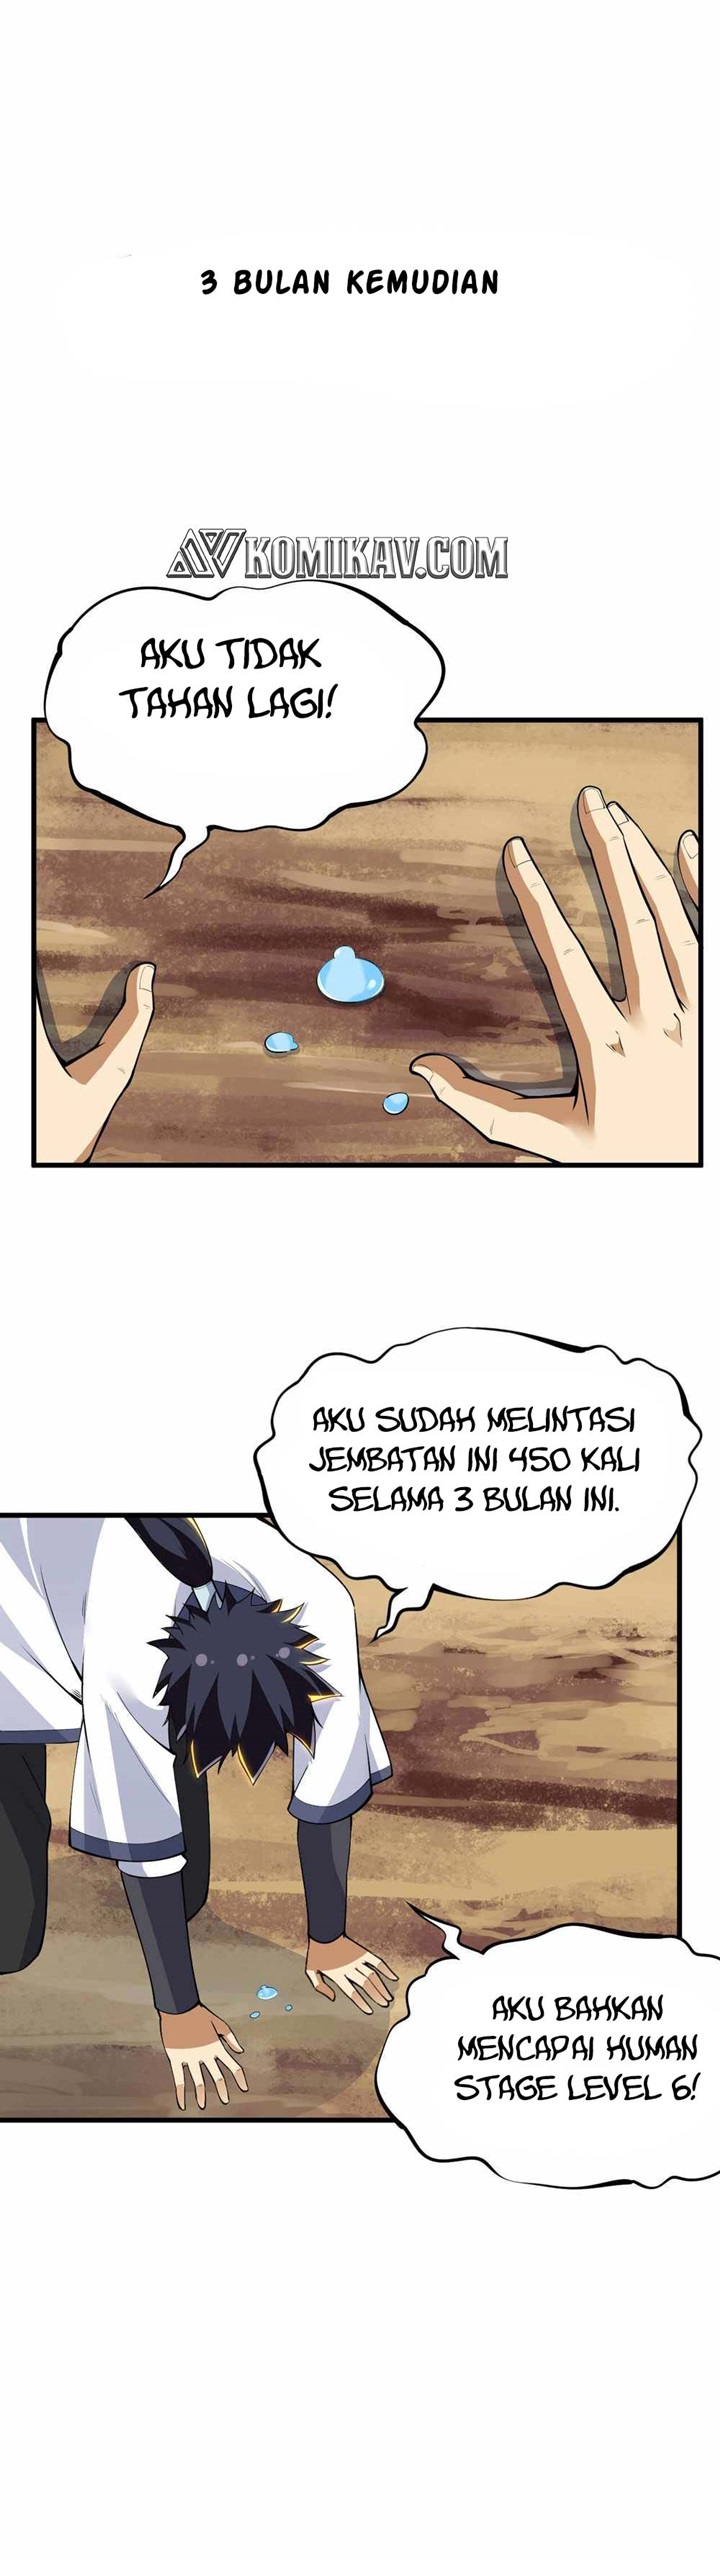 Dilarang COPAS - situs resmi www.mangacanblog.com - Komik i just want to be beaten to death by everyone 036 - chapter 36 37 Indonesia i just want to be beaten to death by everyone 036 - chapter 36 Terbaru 8|Baca Manga Komik Indonesia|Mangacan